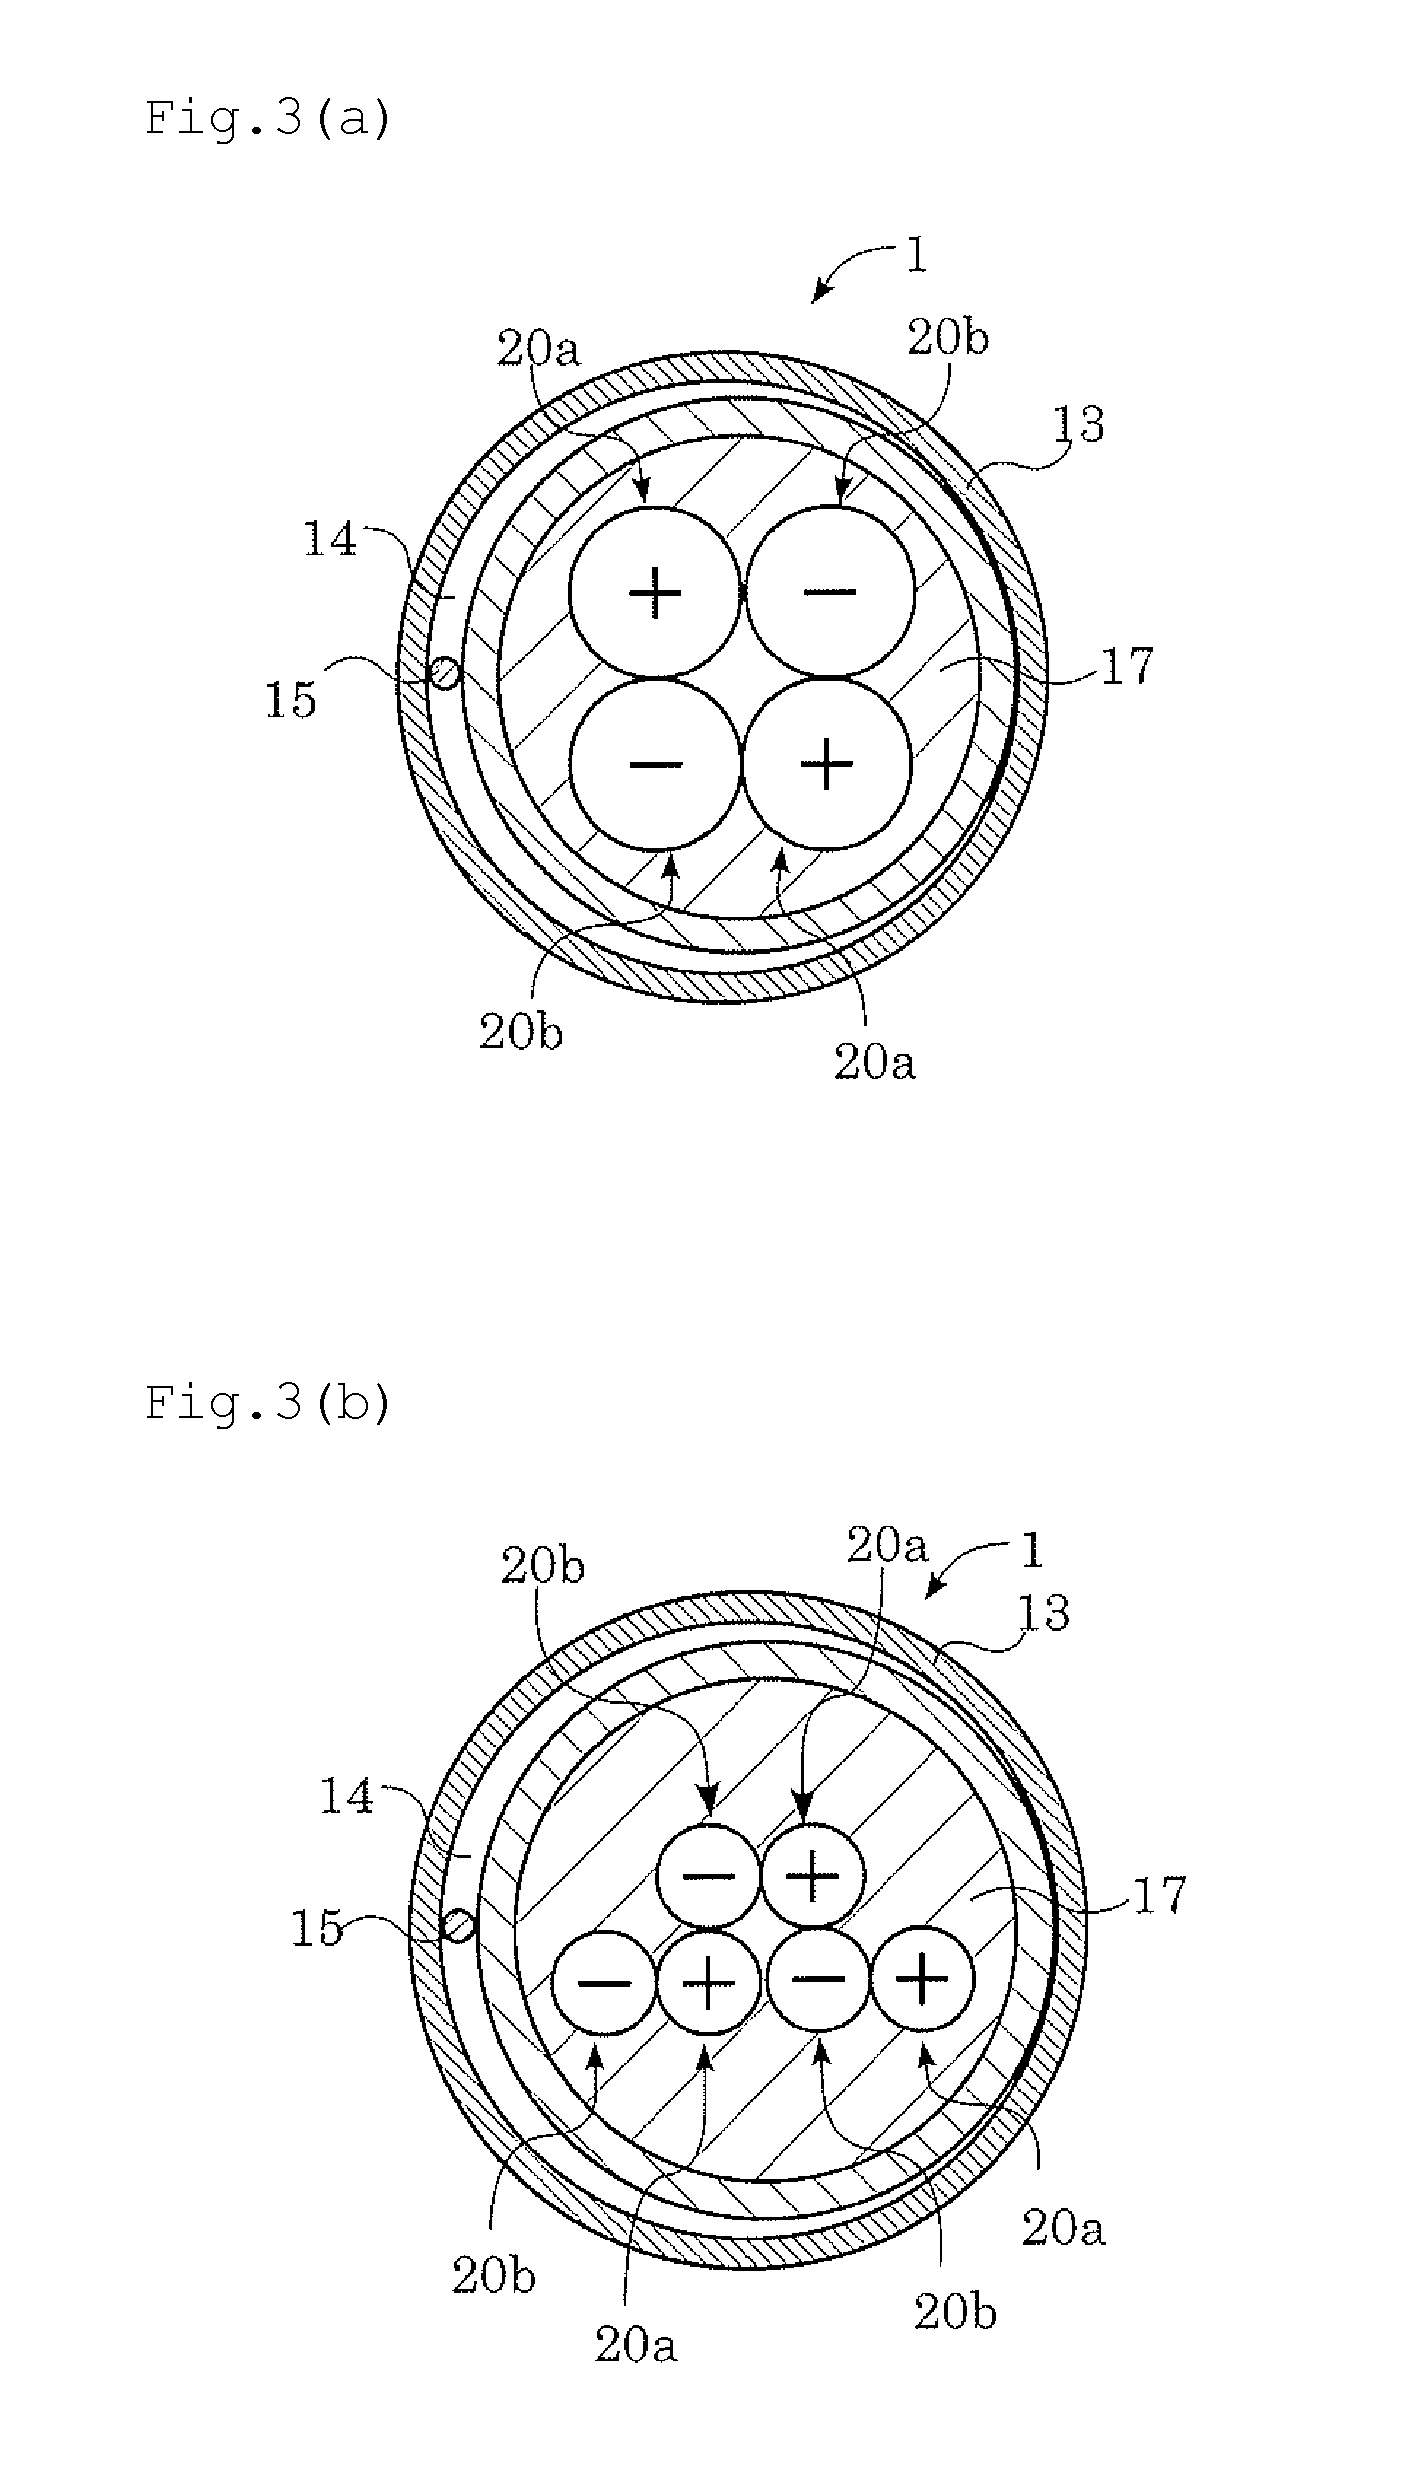 Power supply wire for high-frequency current